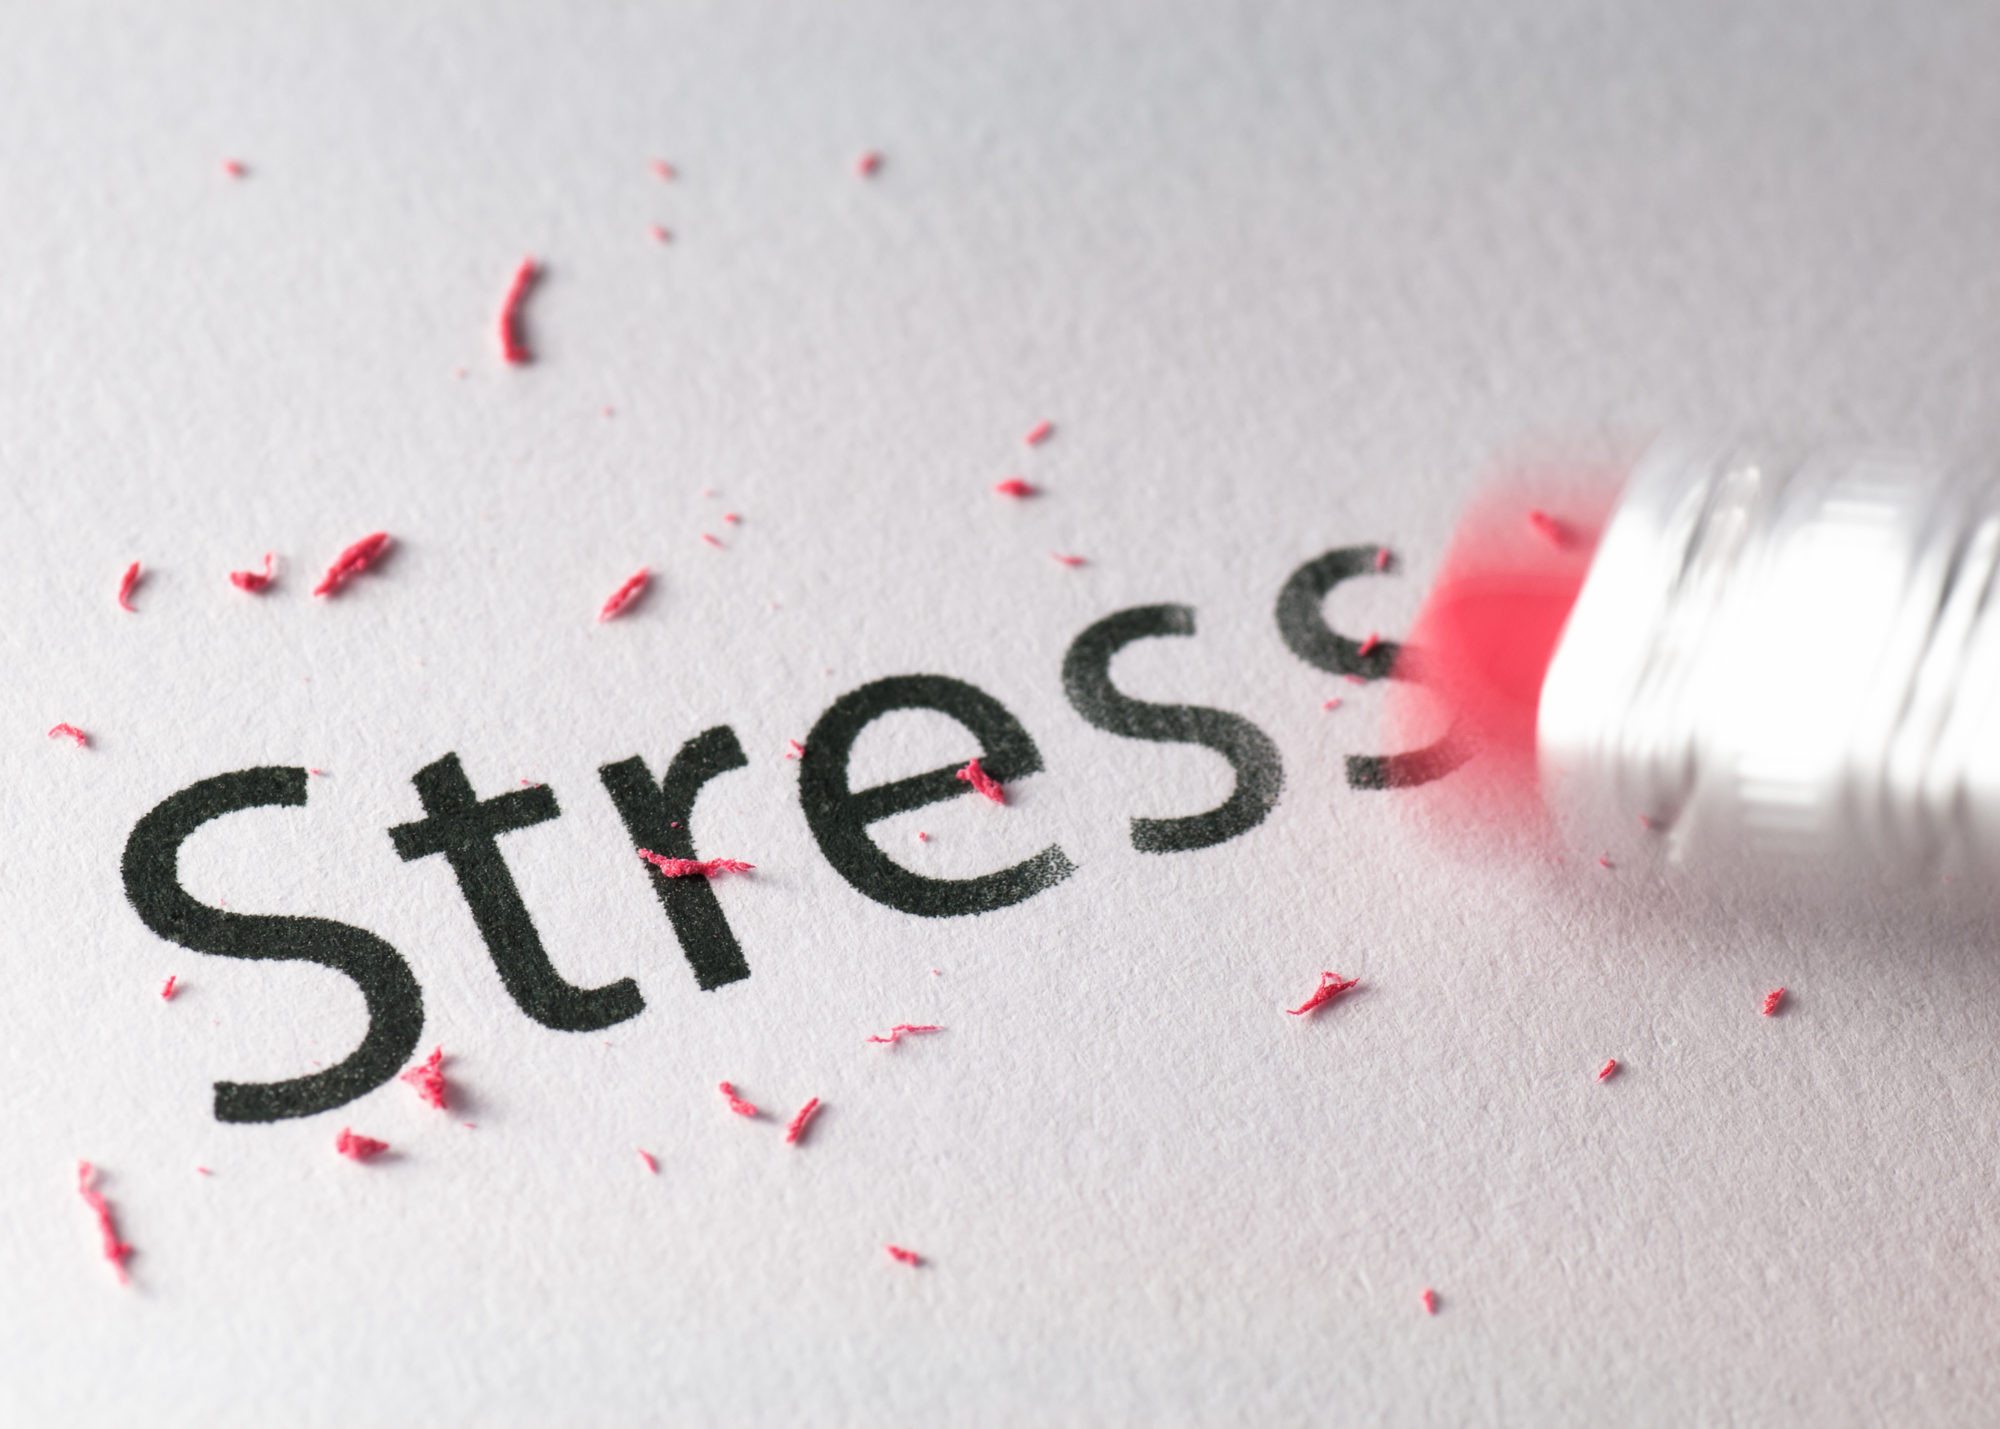 The text "Stress" is shown being erased